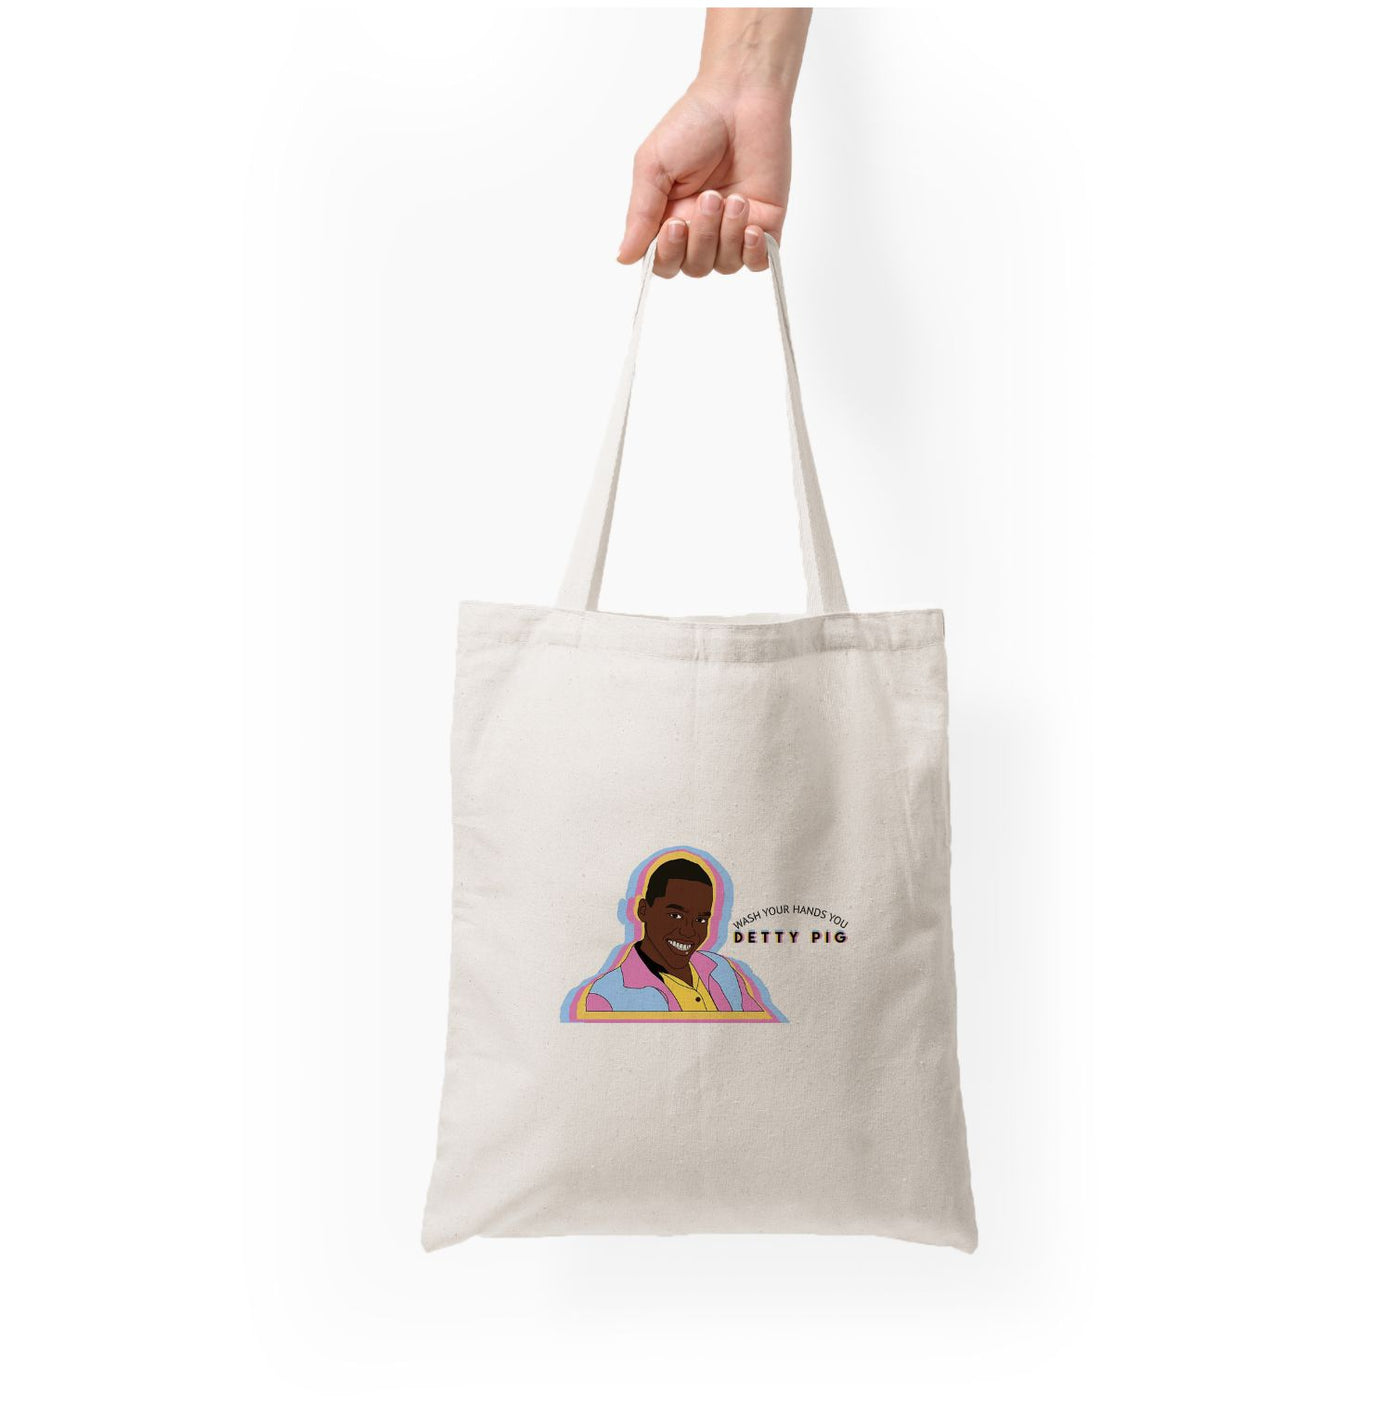 Wash Your Hands You Detty Pig - Sex Education Tote Bag